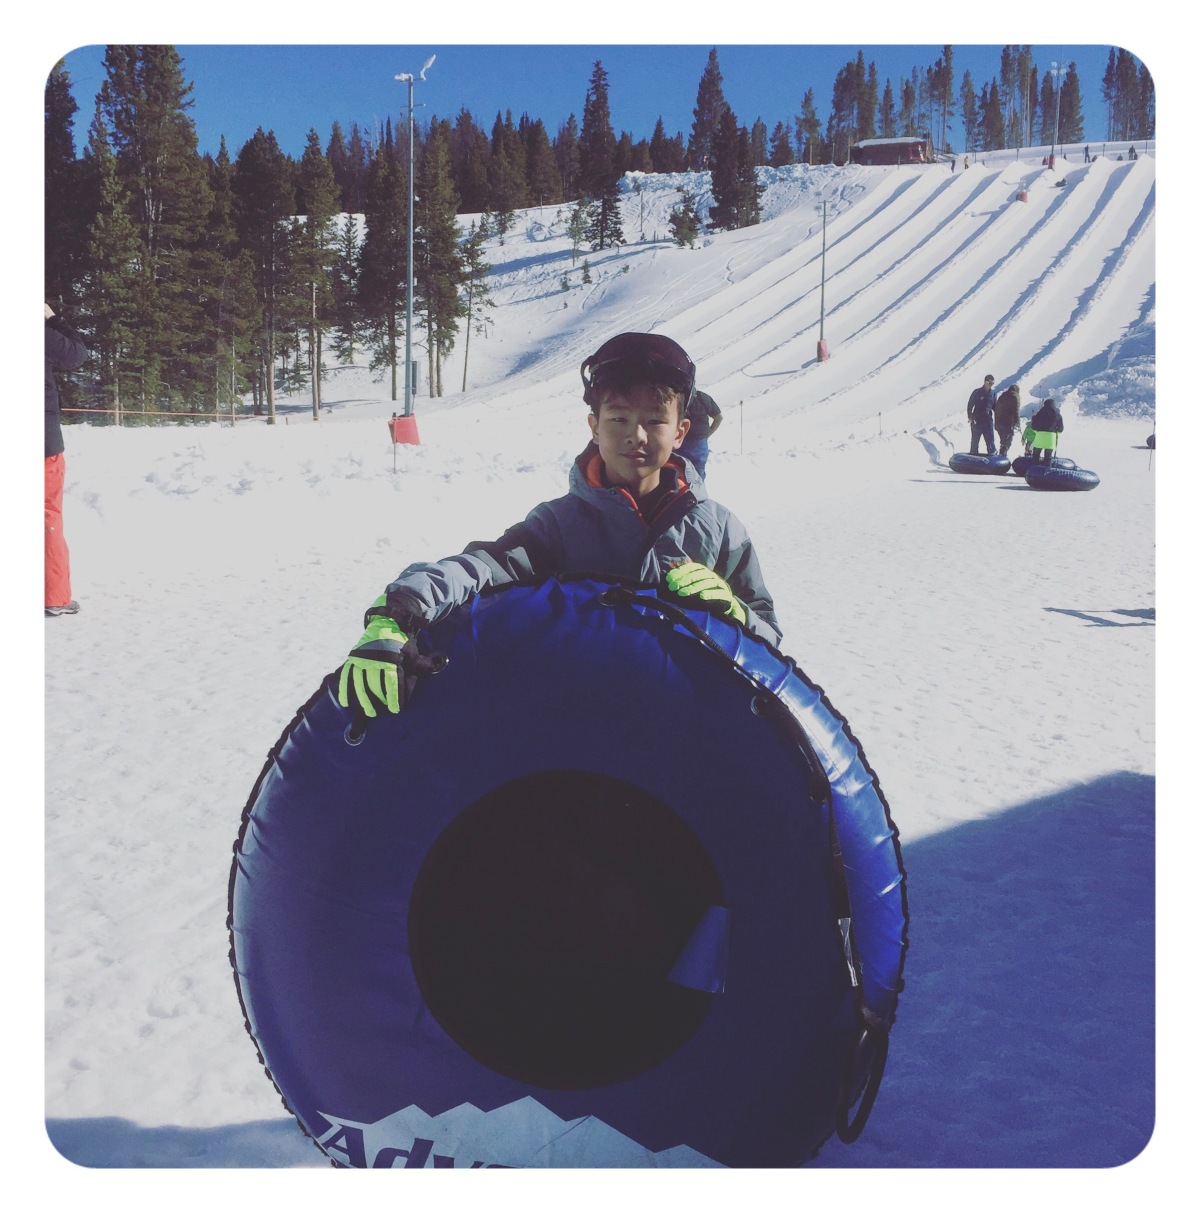 Day 2: Tubing in Vail